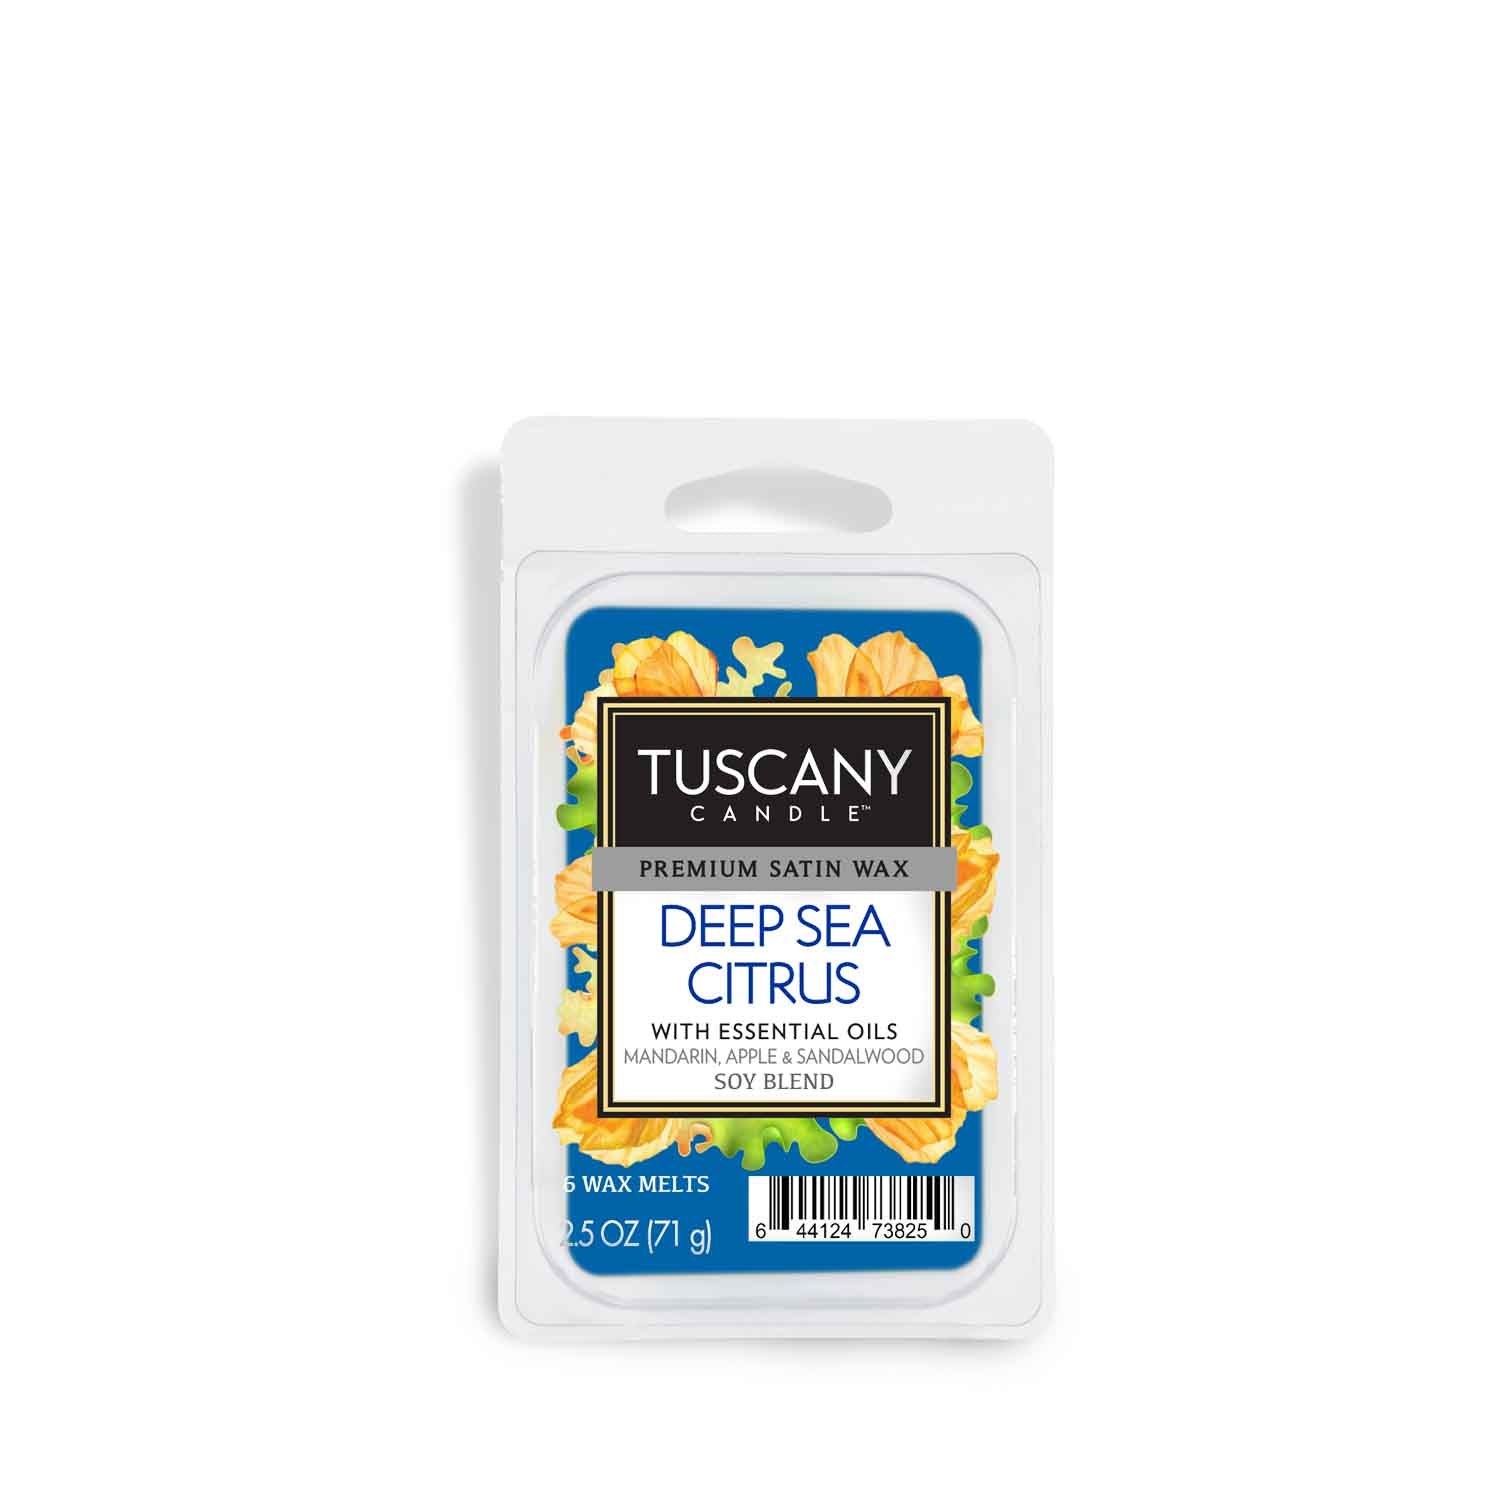 Tuscany Candle Deep Sea Citrus Scented Wax Melt (2.5 oz): This fragrance note-filled wax bar is perfect for creating a soothing atmosphere in your home. With its invigorating blend of deep sea citrus, this